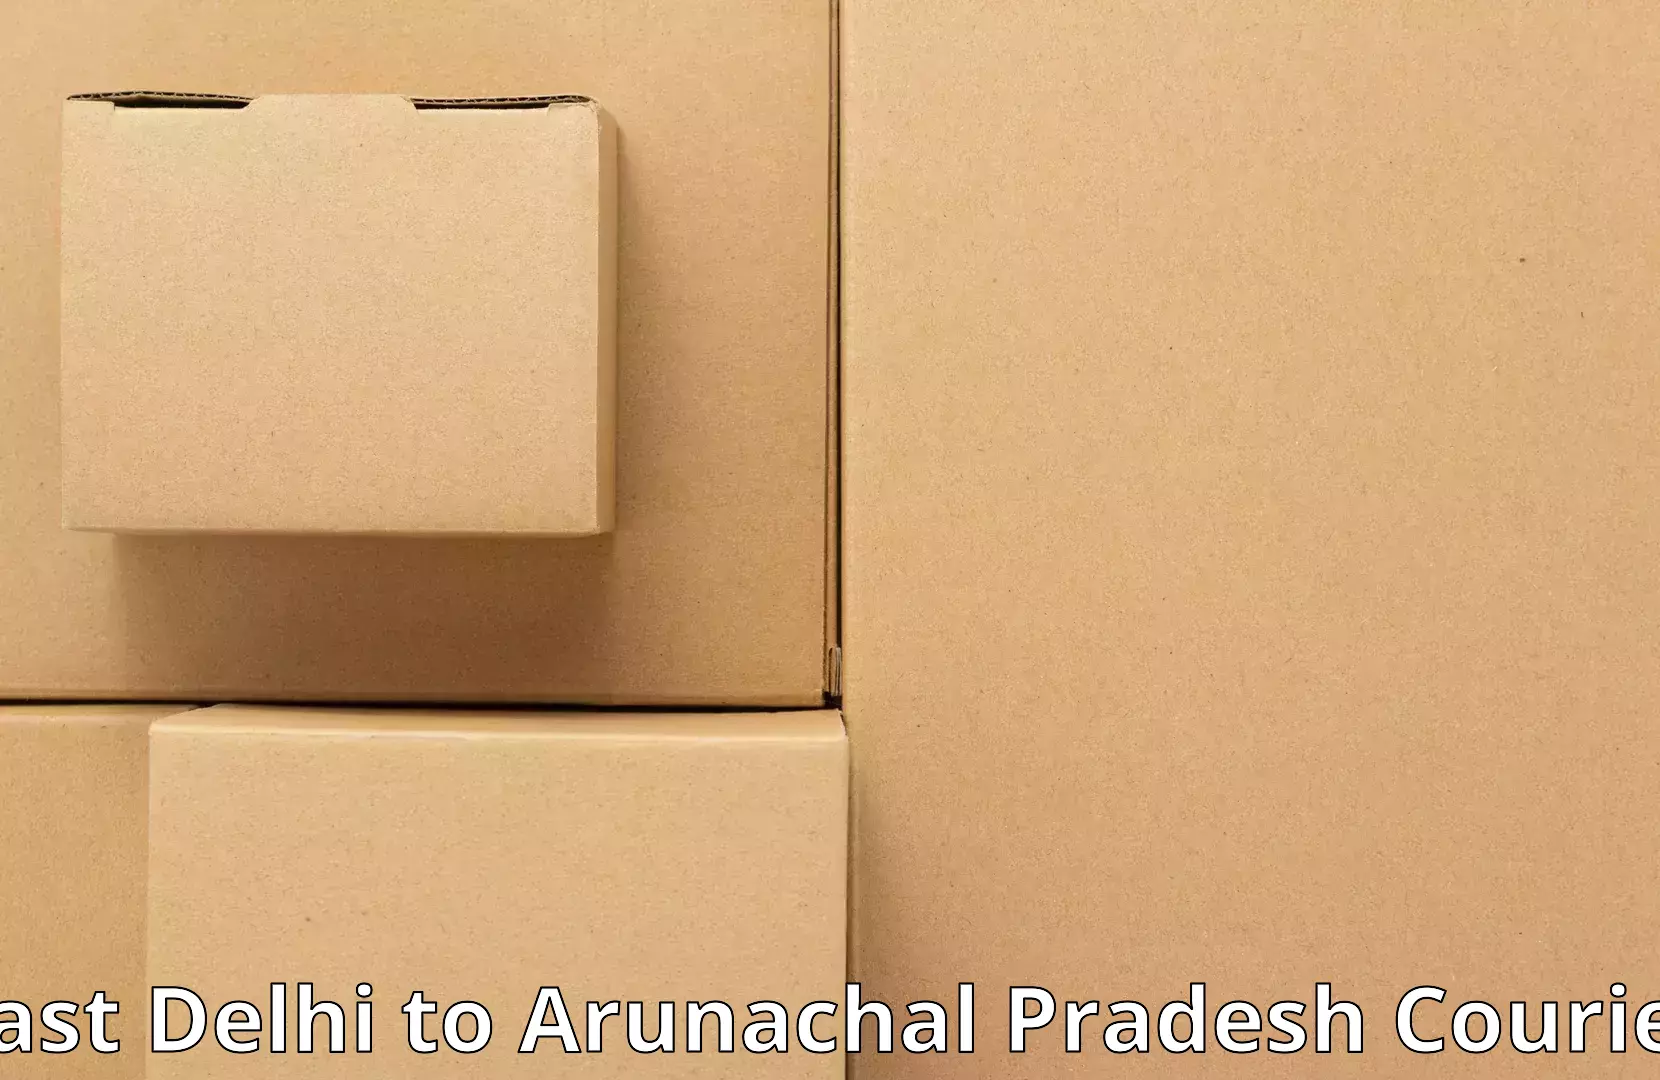 Professional moving company East Delhi to Chowkham